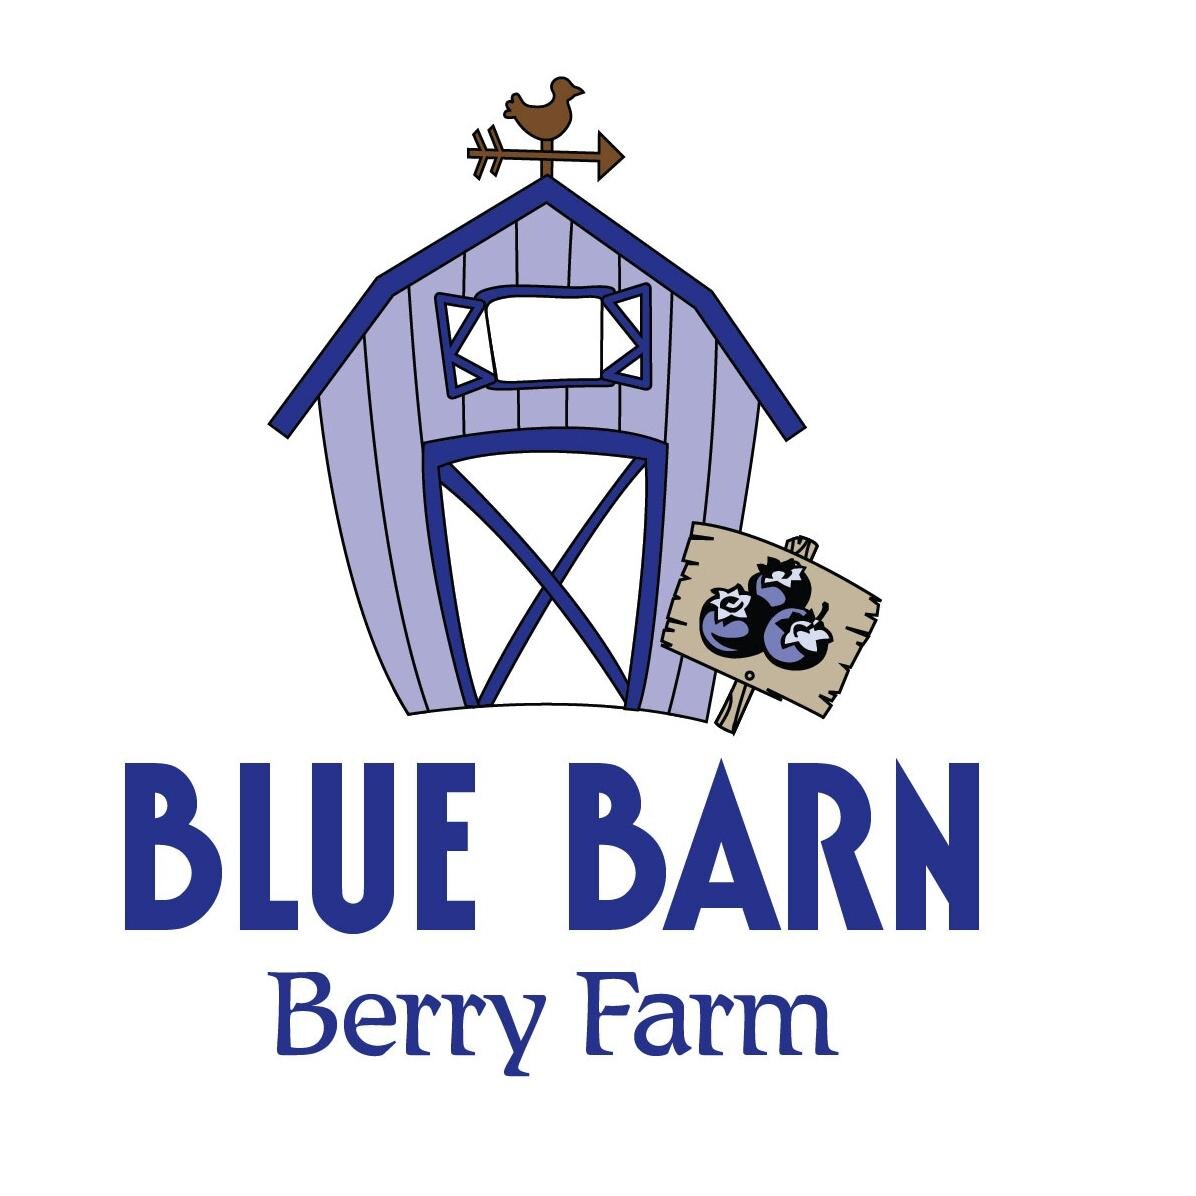 We are a u-pick berry farm, country market, & event hall.  Join us for cooking classes or host your next party, gathering or event here!